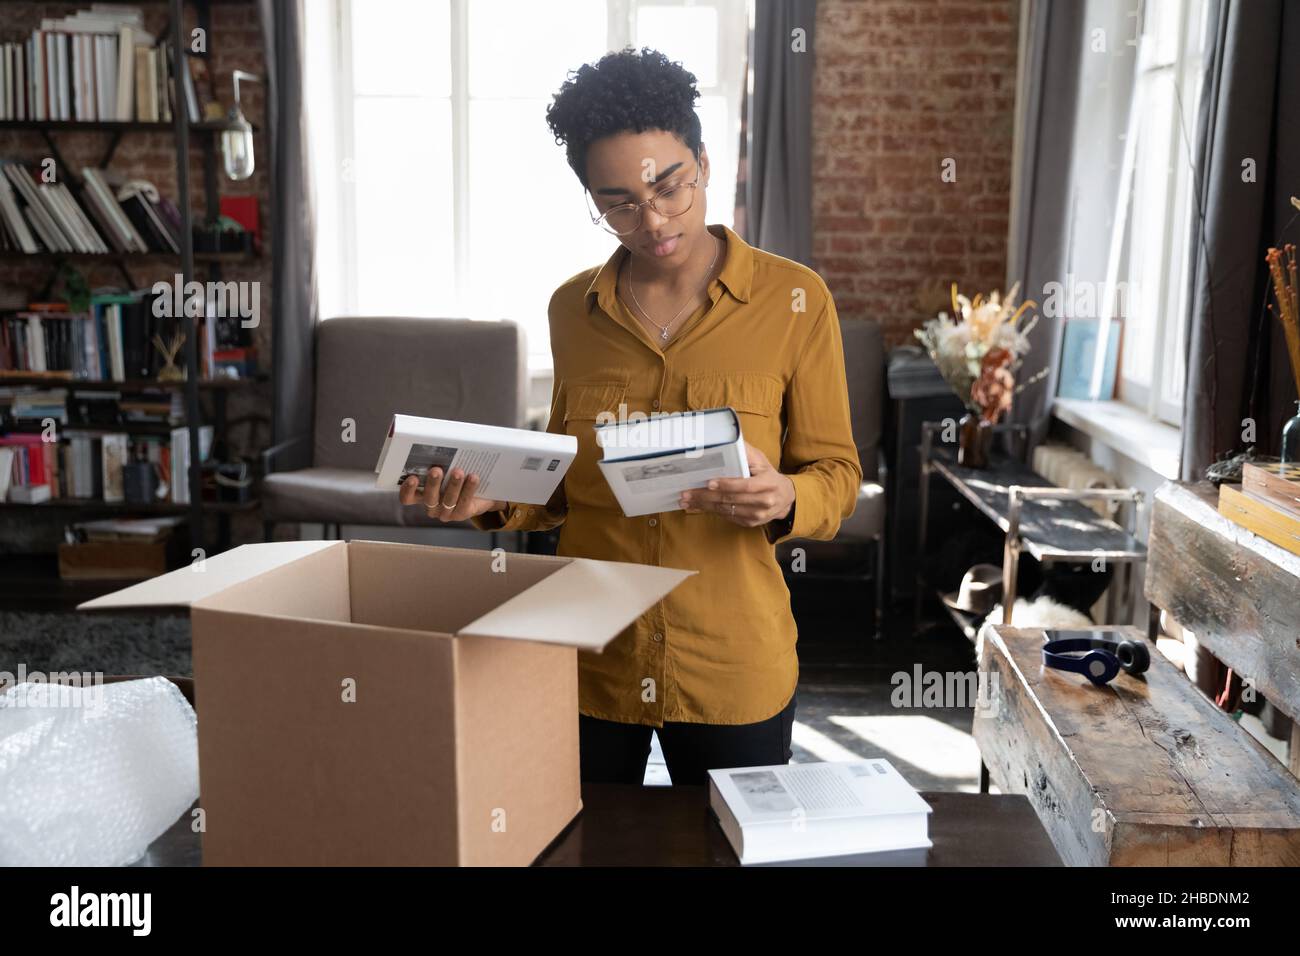 Happy young African American woman unpacking books from box. Stock Photo